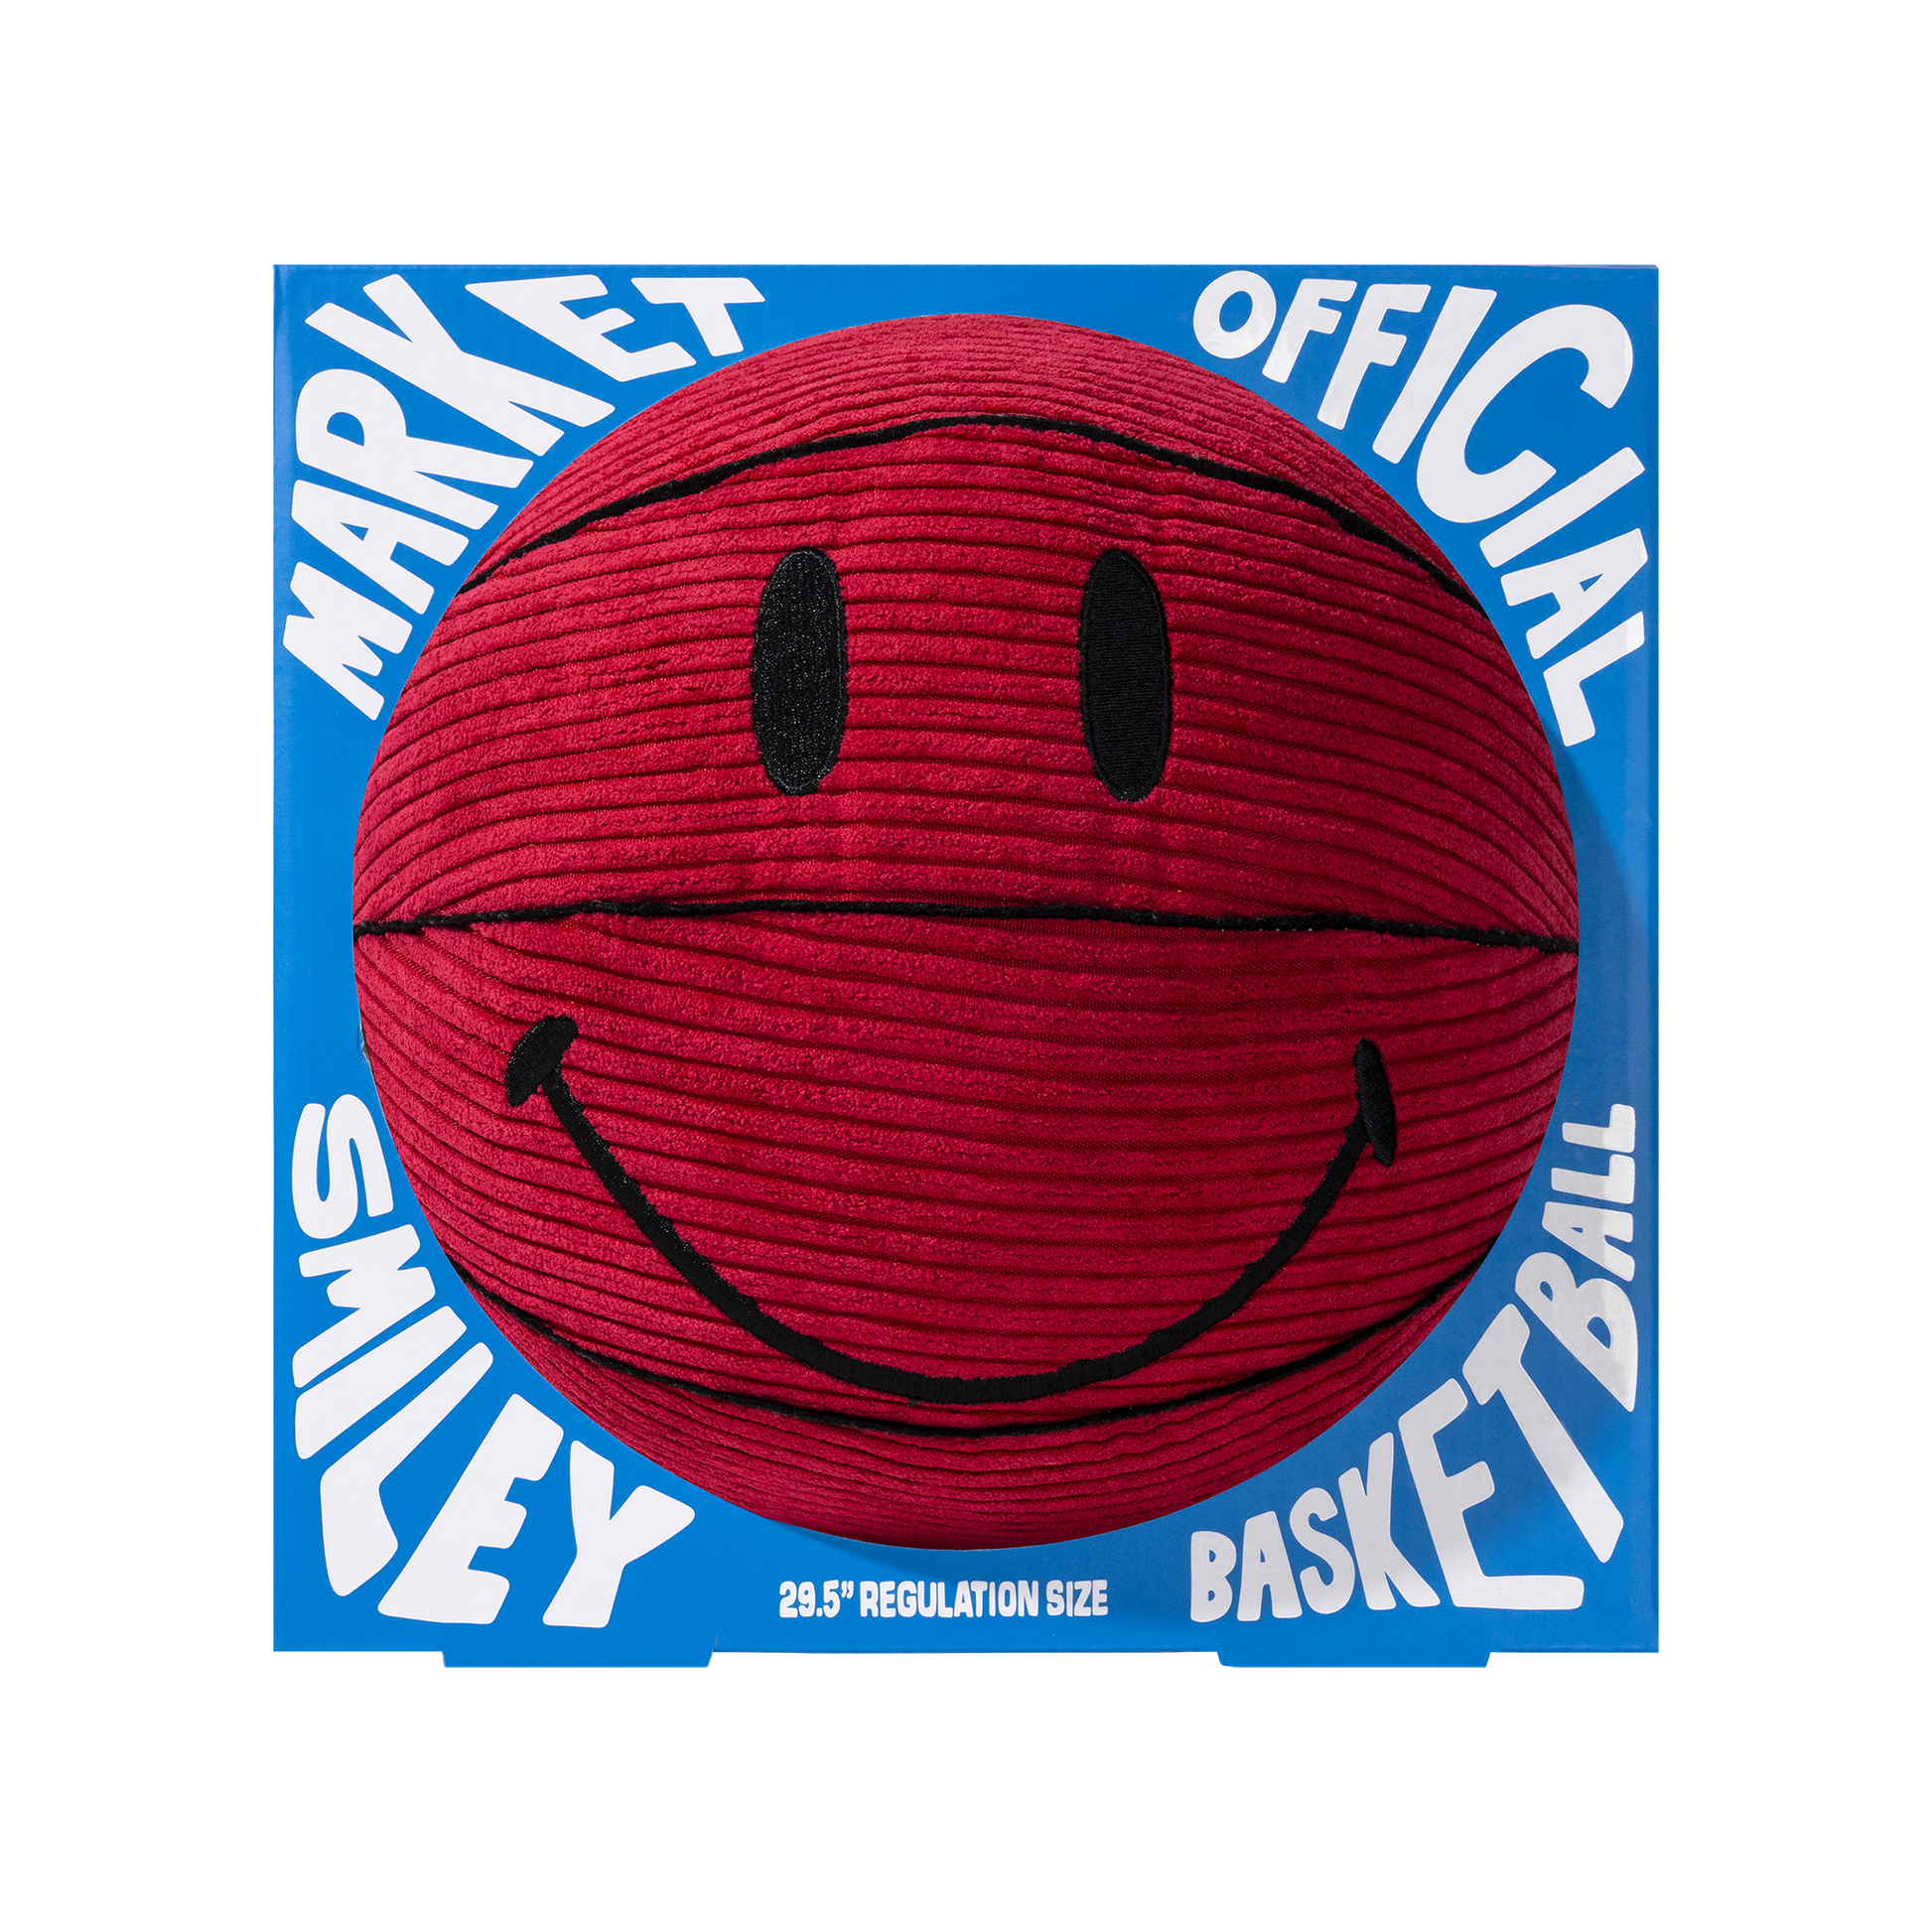 MARKET clothing brand SMILEY DEVIL PLUSH BASKETBALL. Find more homegoods and graphic tees at MarketStudios.com. Formally Chinatown Market. 